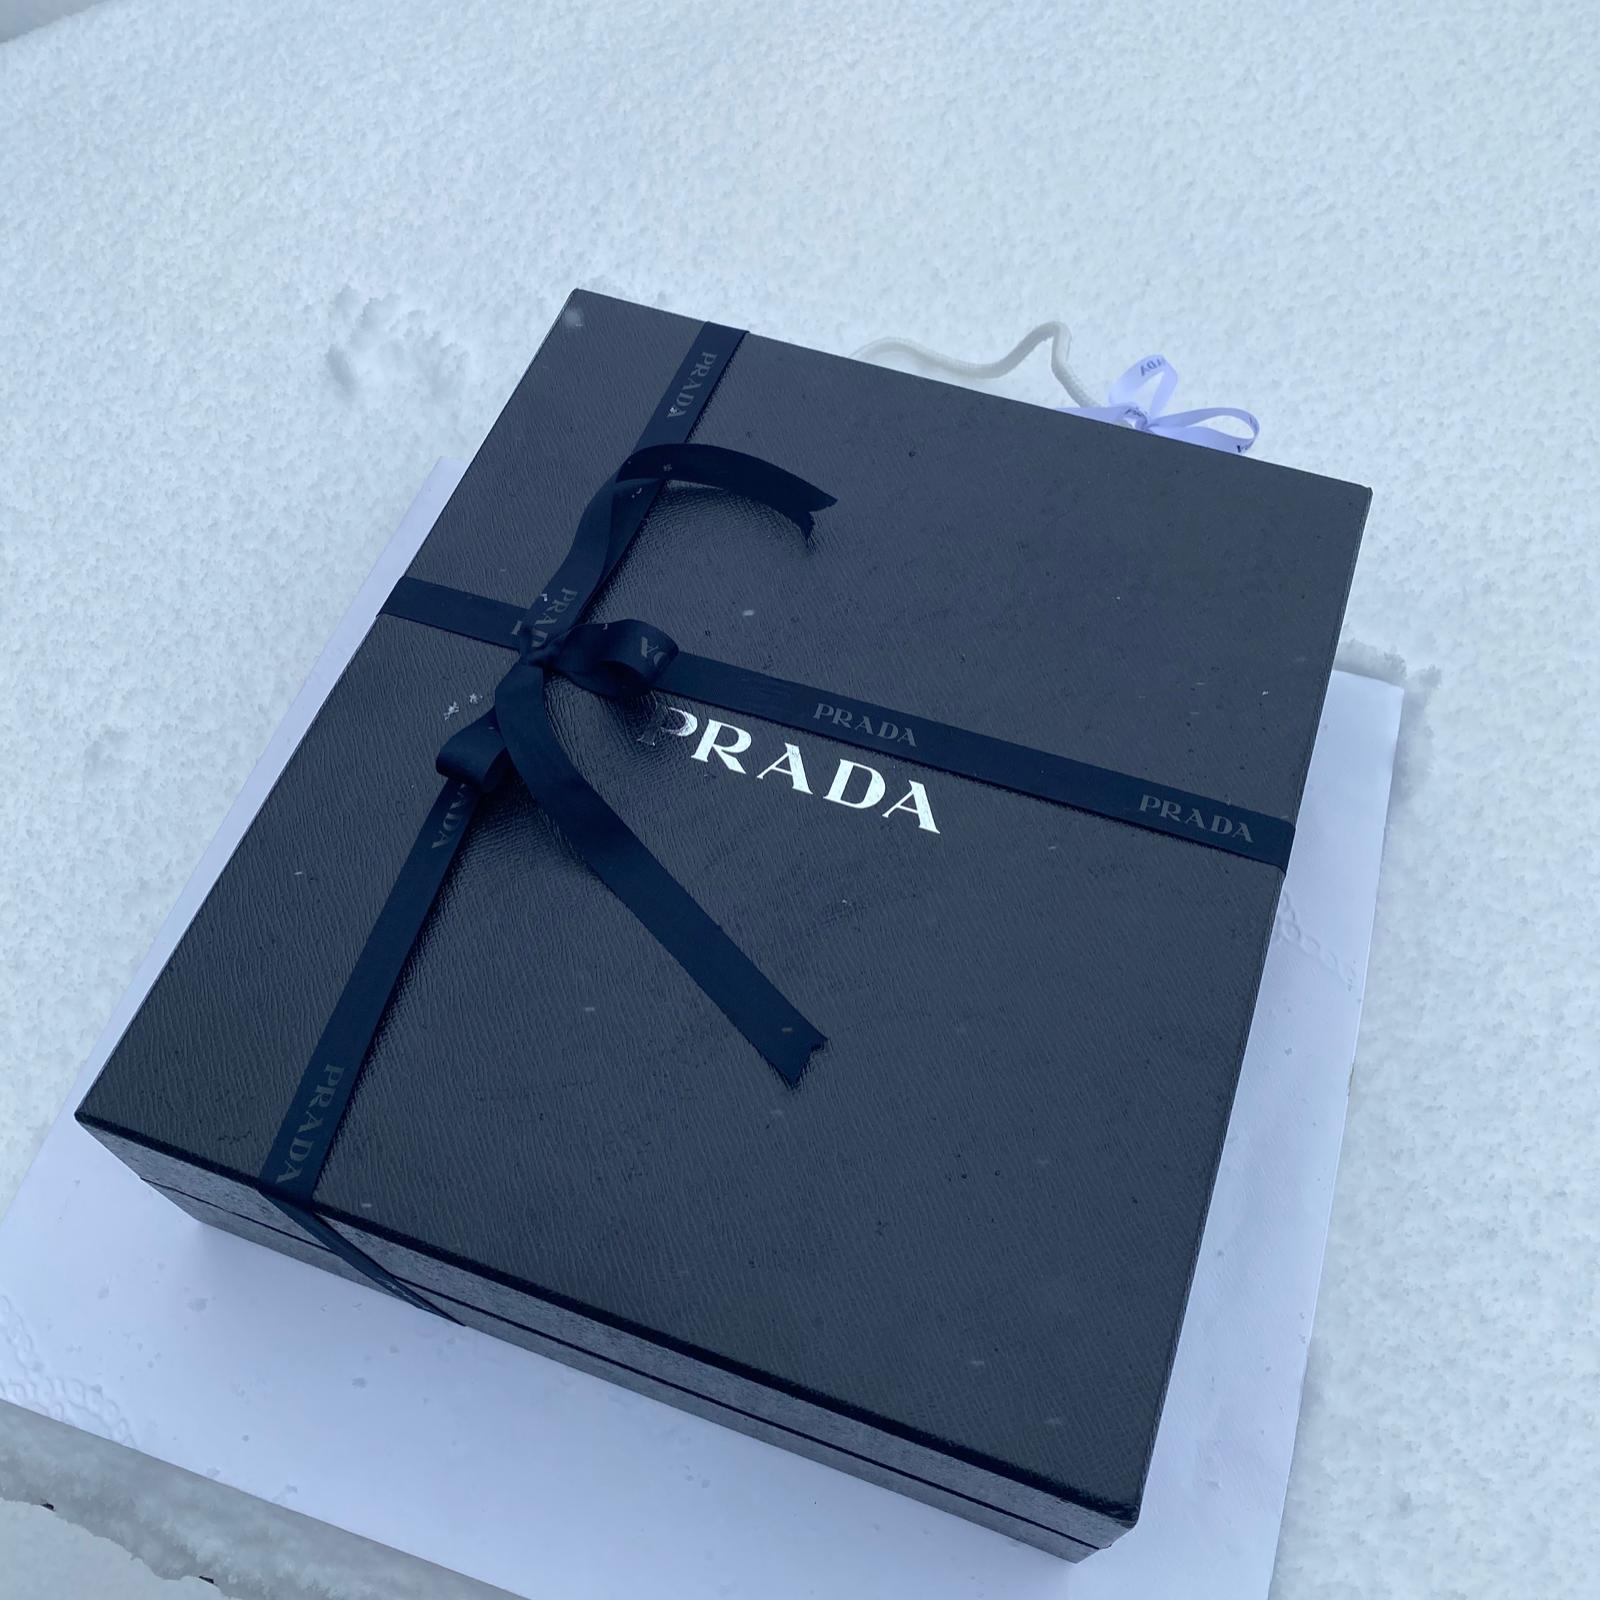 PRADA CRYSTAL UNBOXING WAIT UNTIL YOU SEE THIS